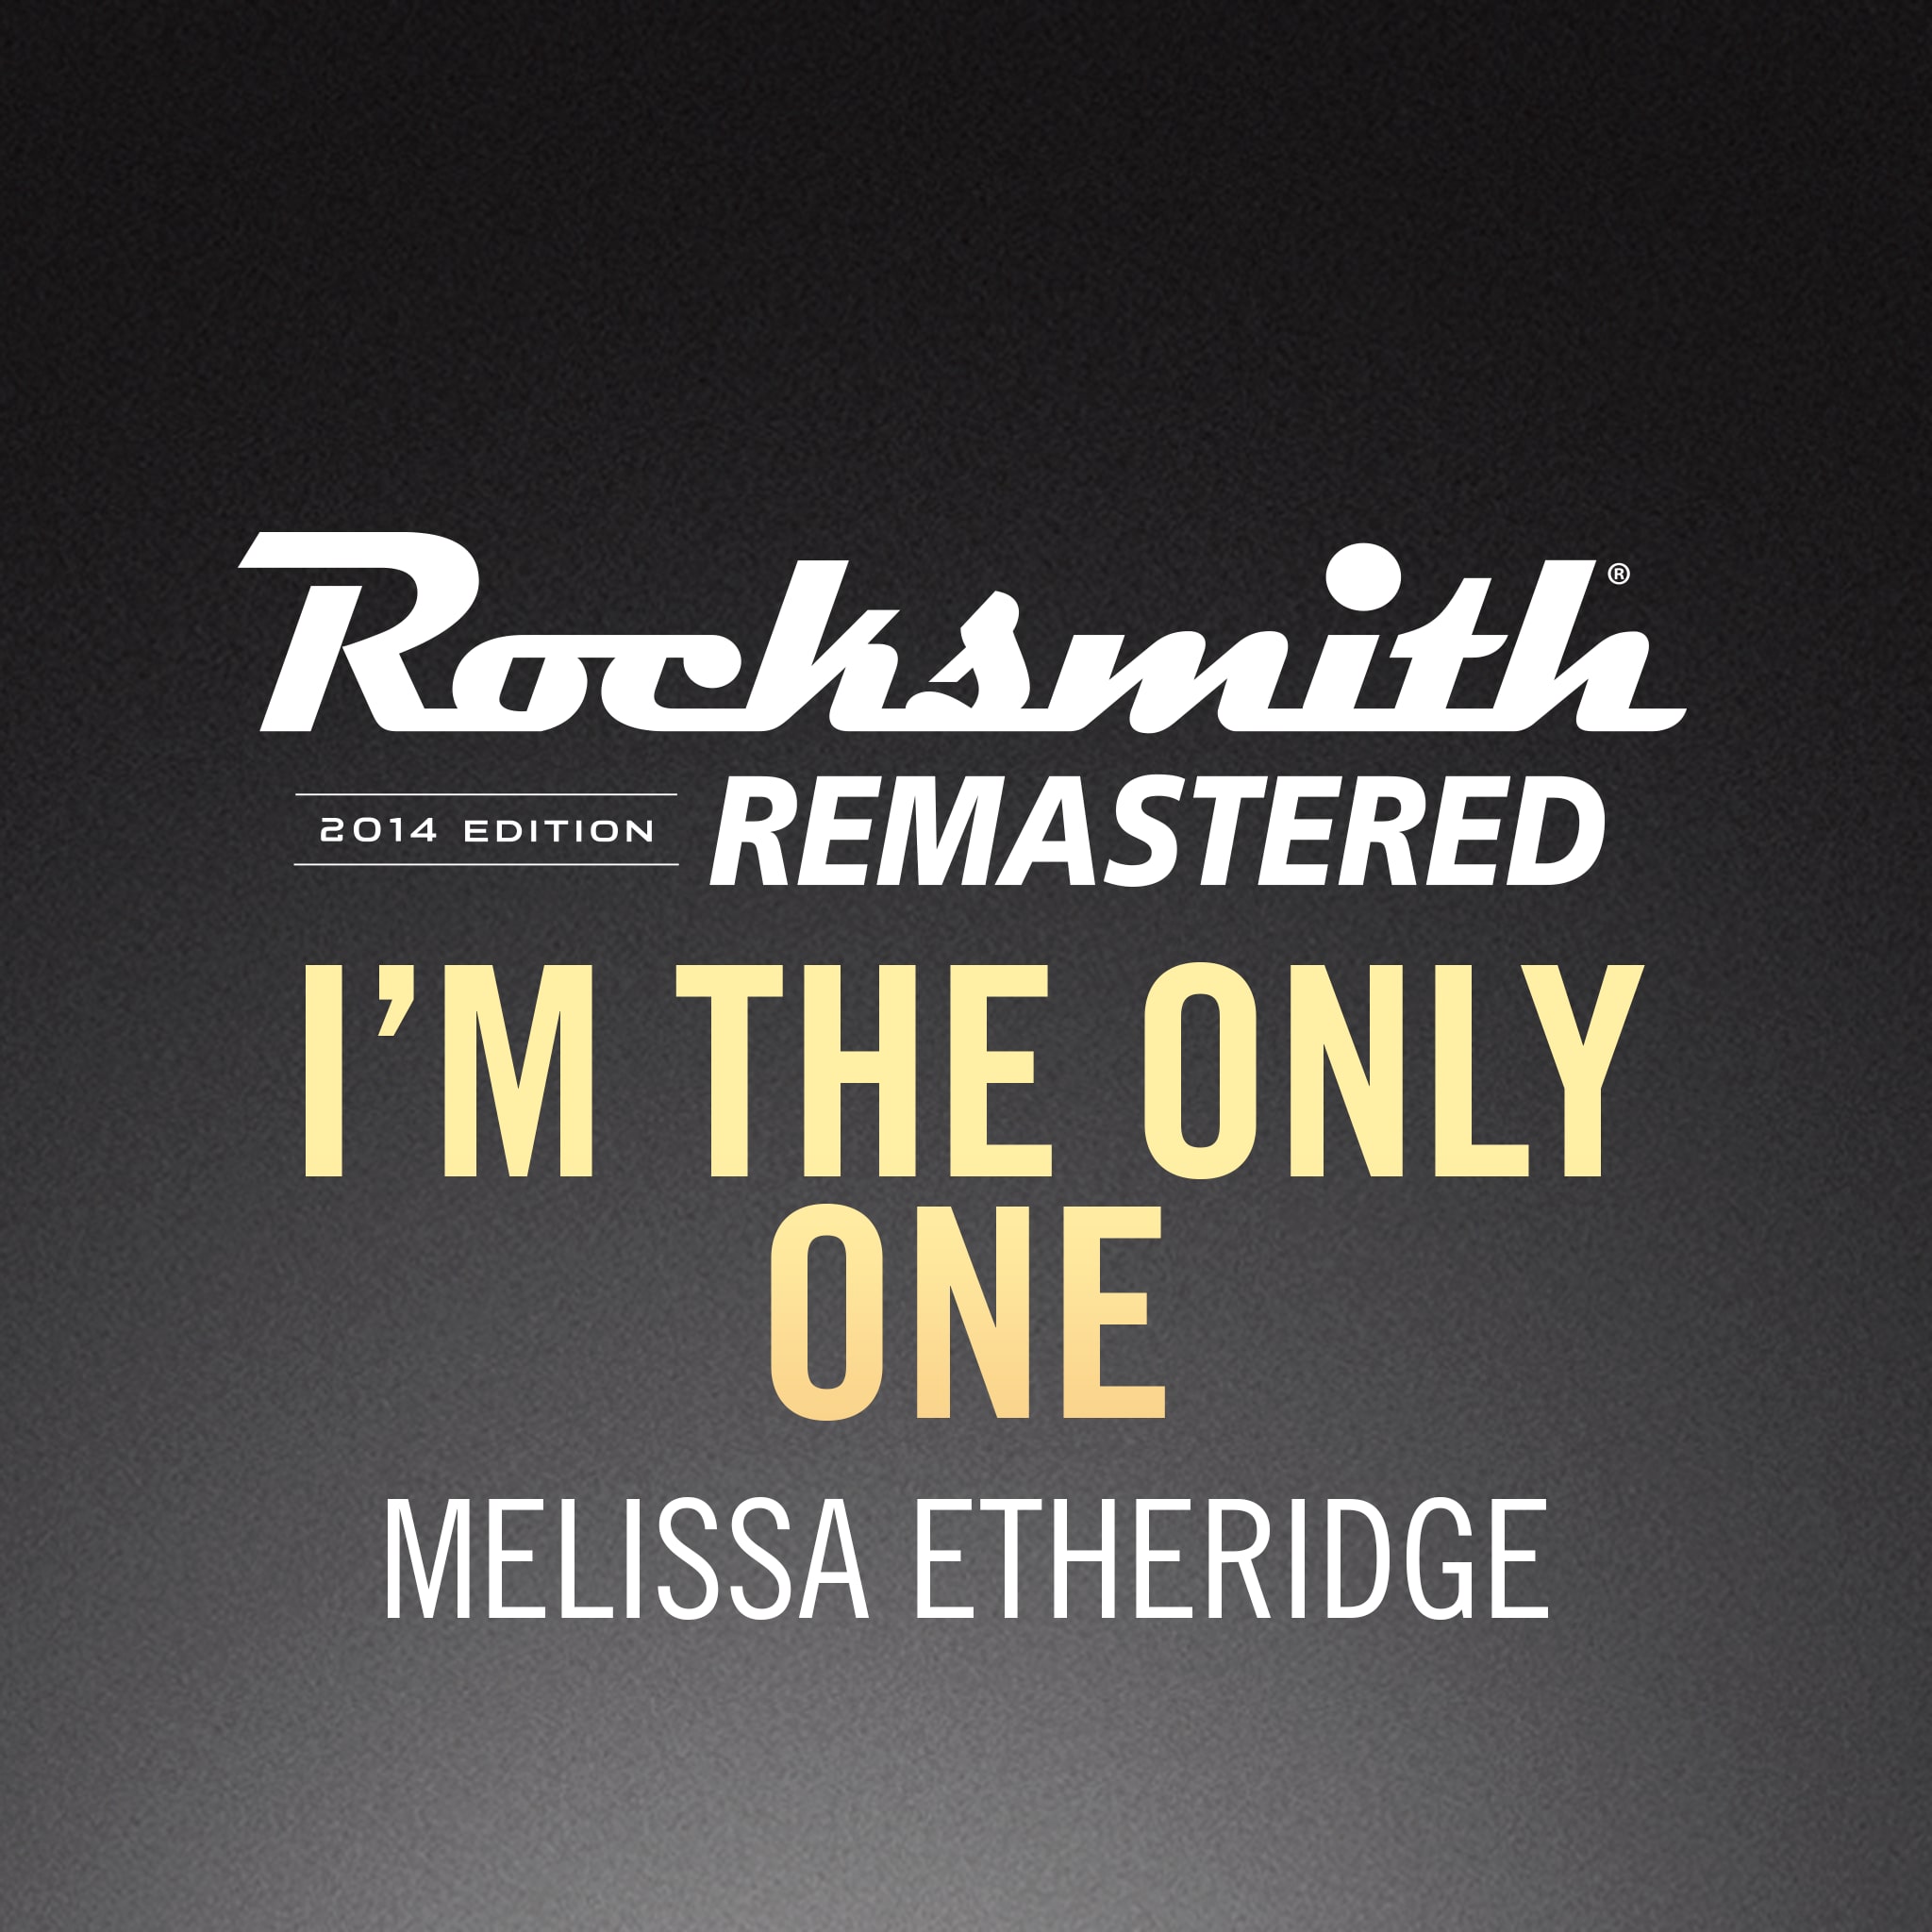 Rocksmith 2014 Edition (Game Only) for PlayStation 3